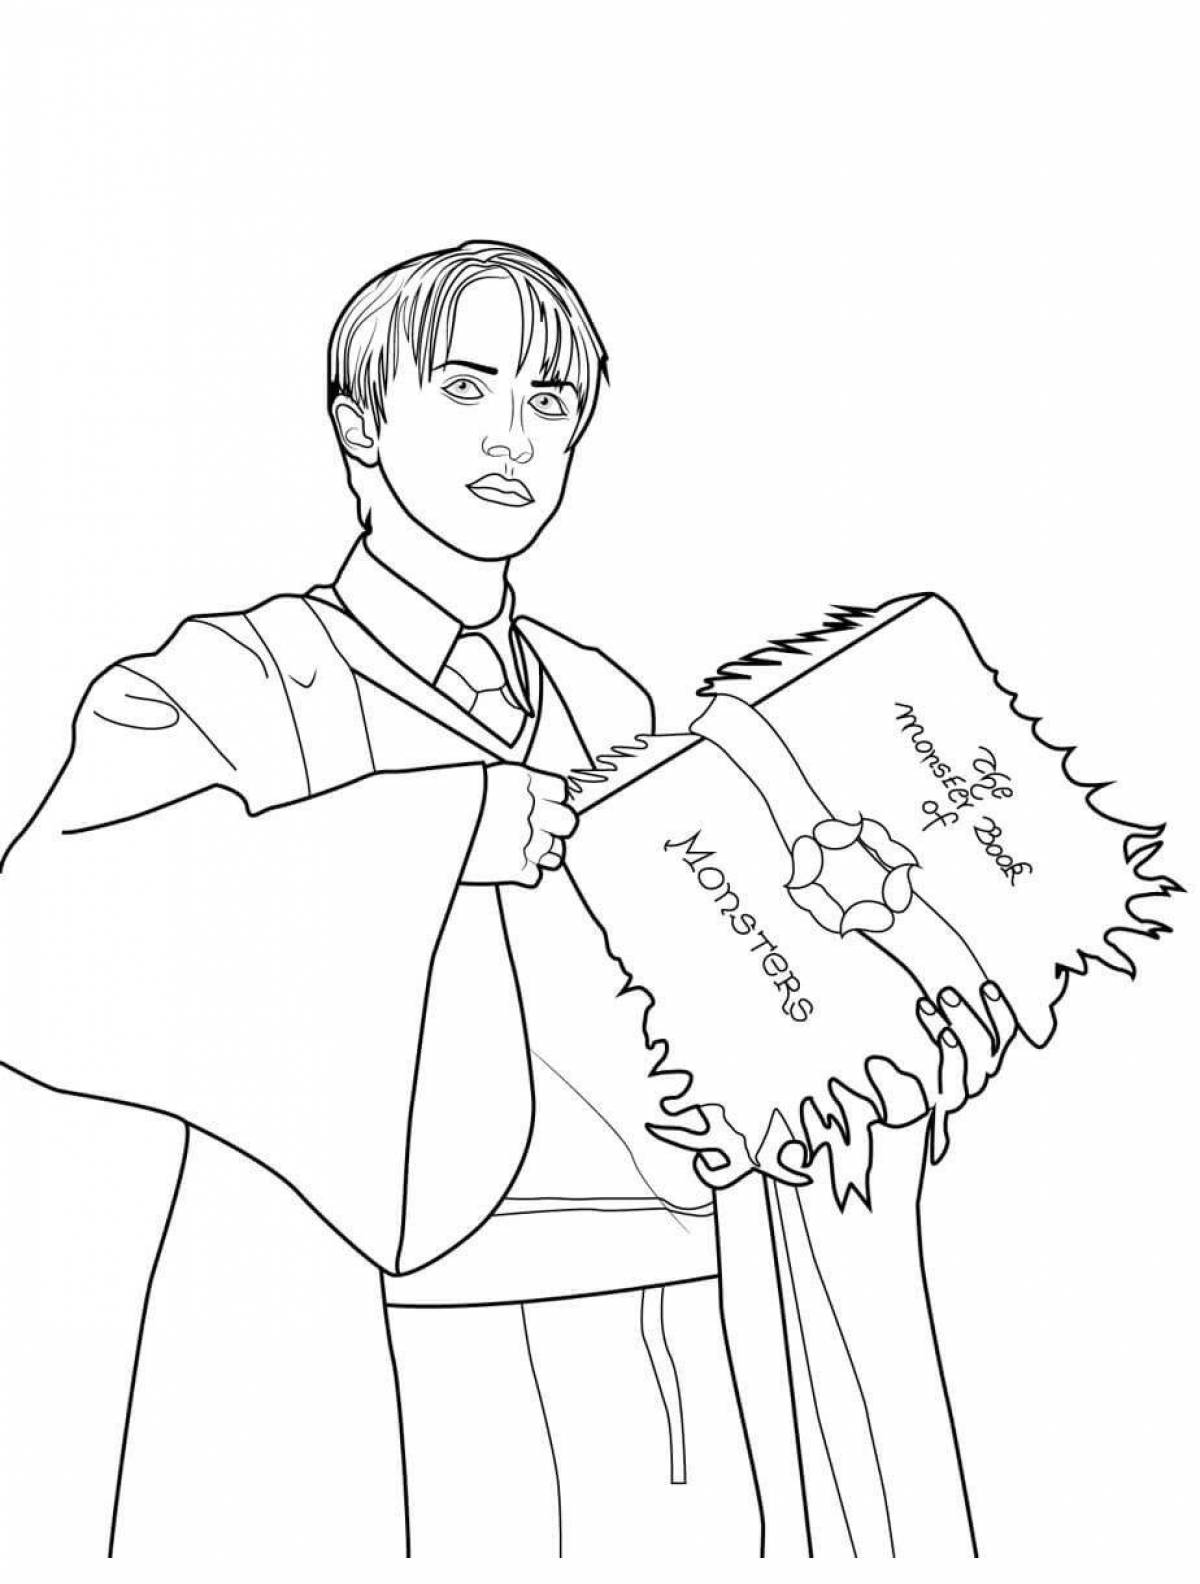 Attractive Draco Malfoy spiral coloring page